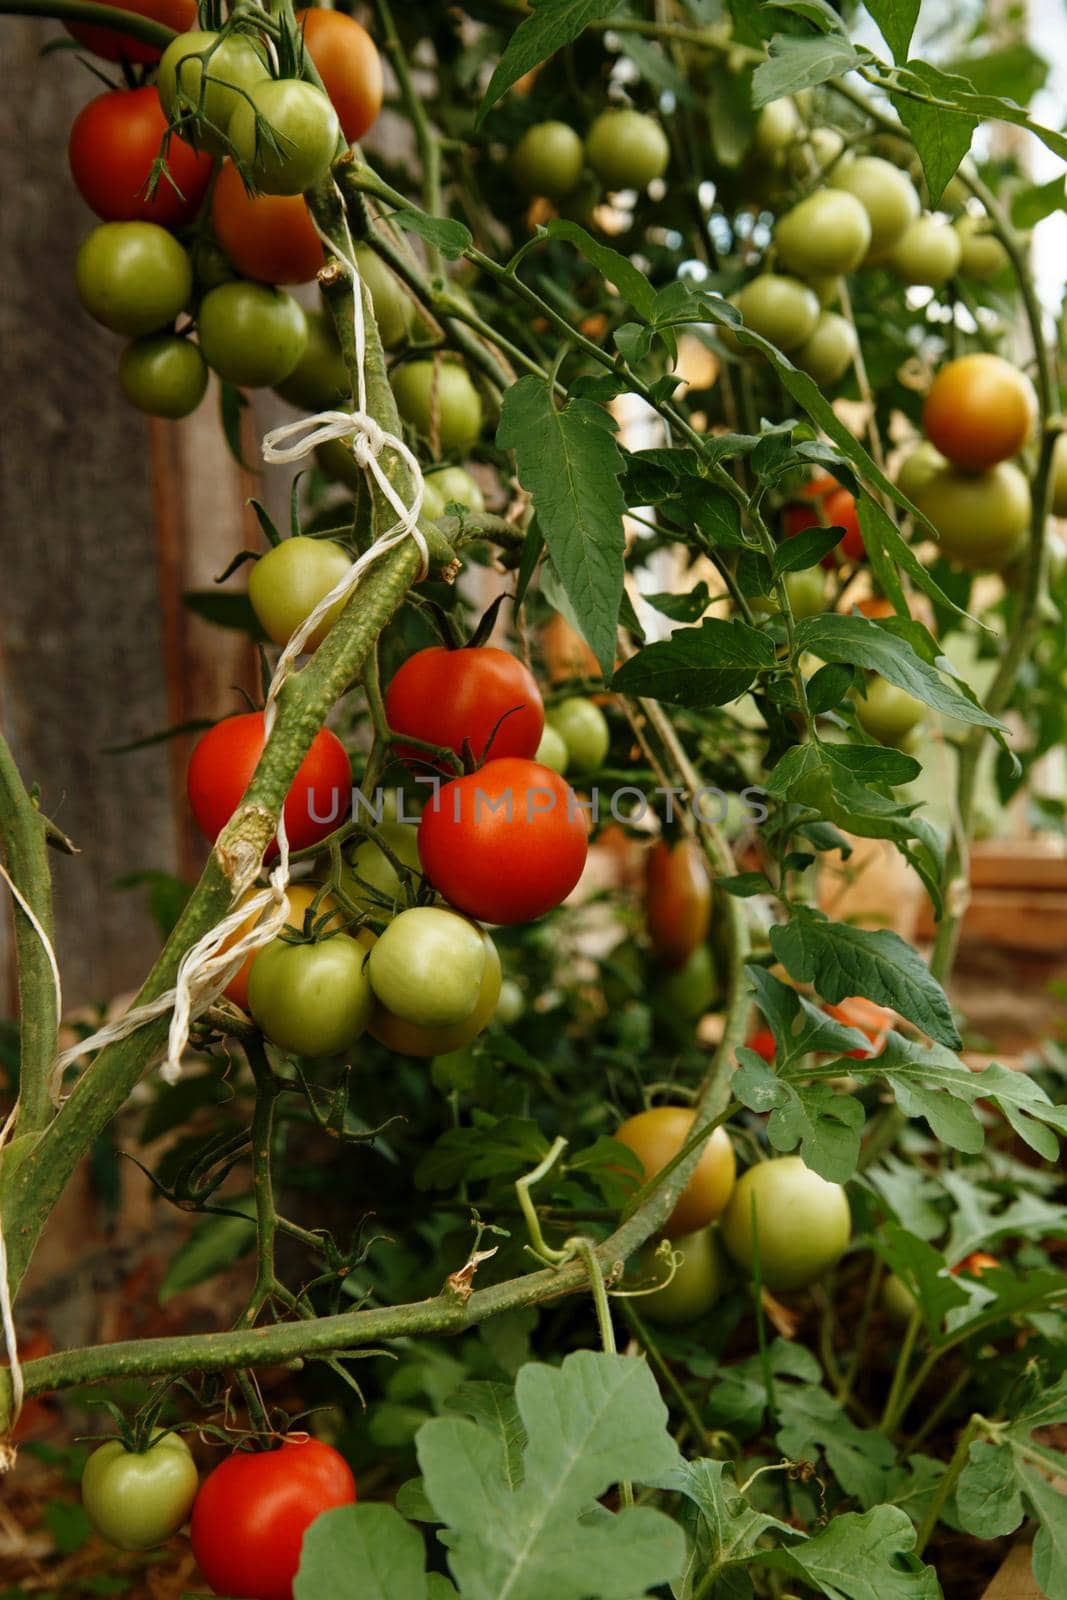 Red and green tomato fruits on green stems in greenhouse.